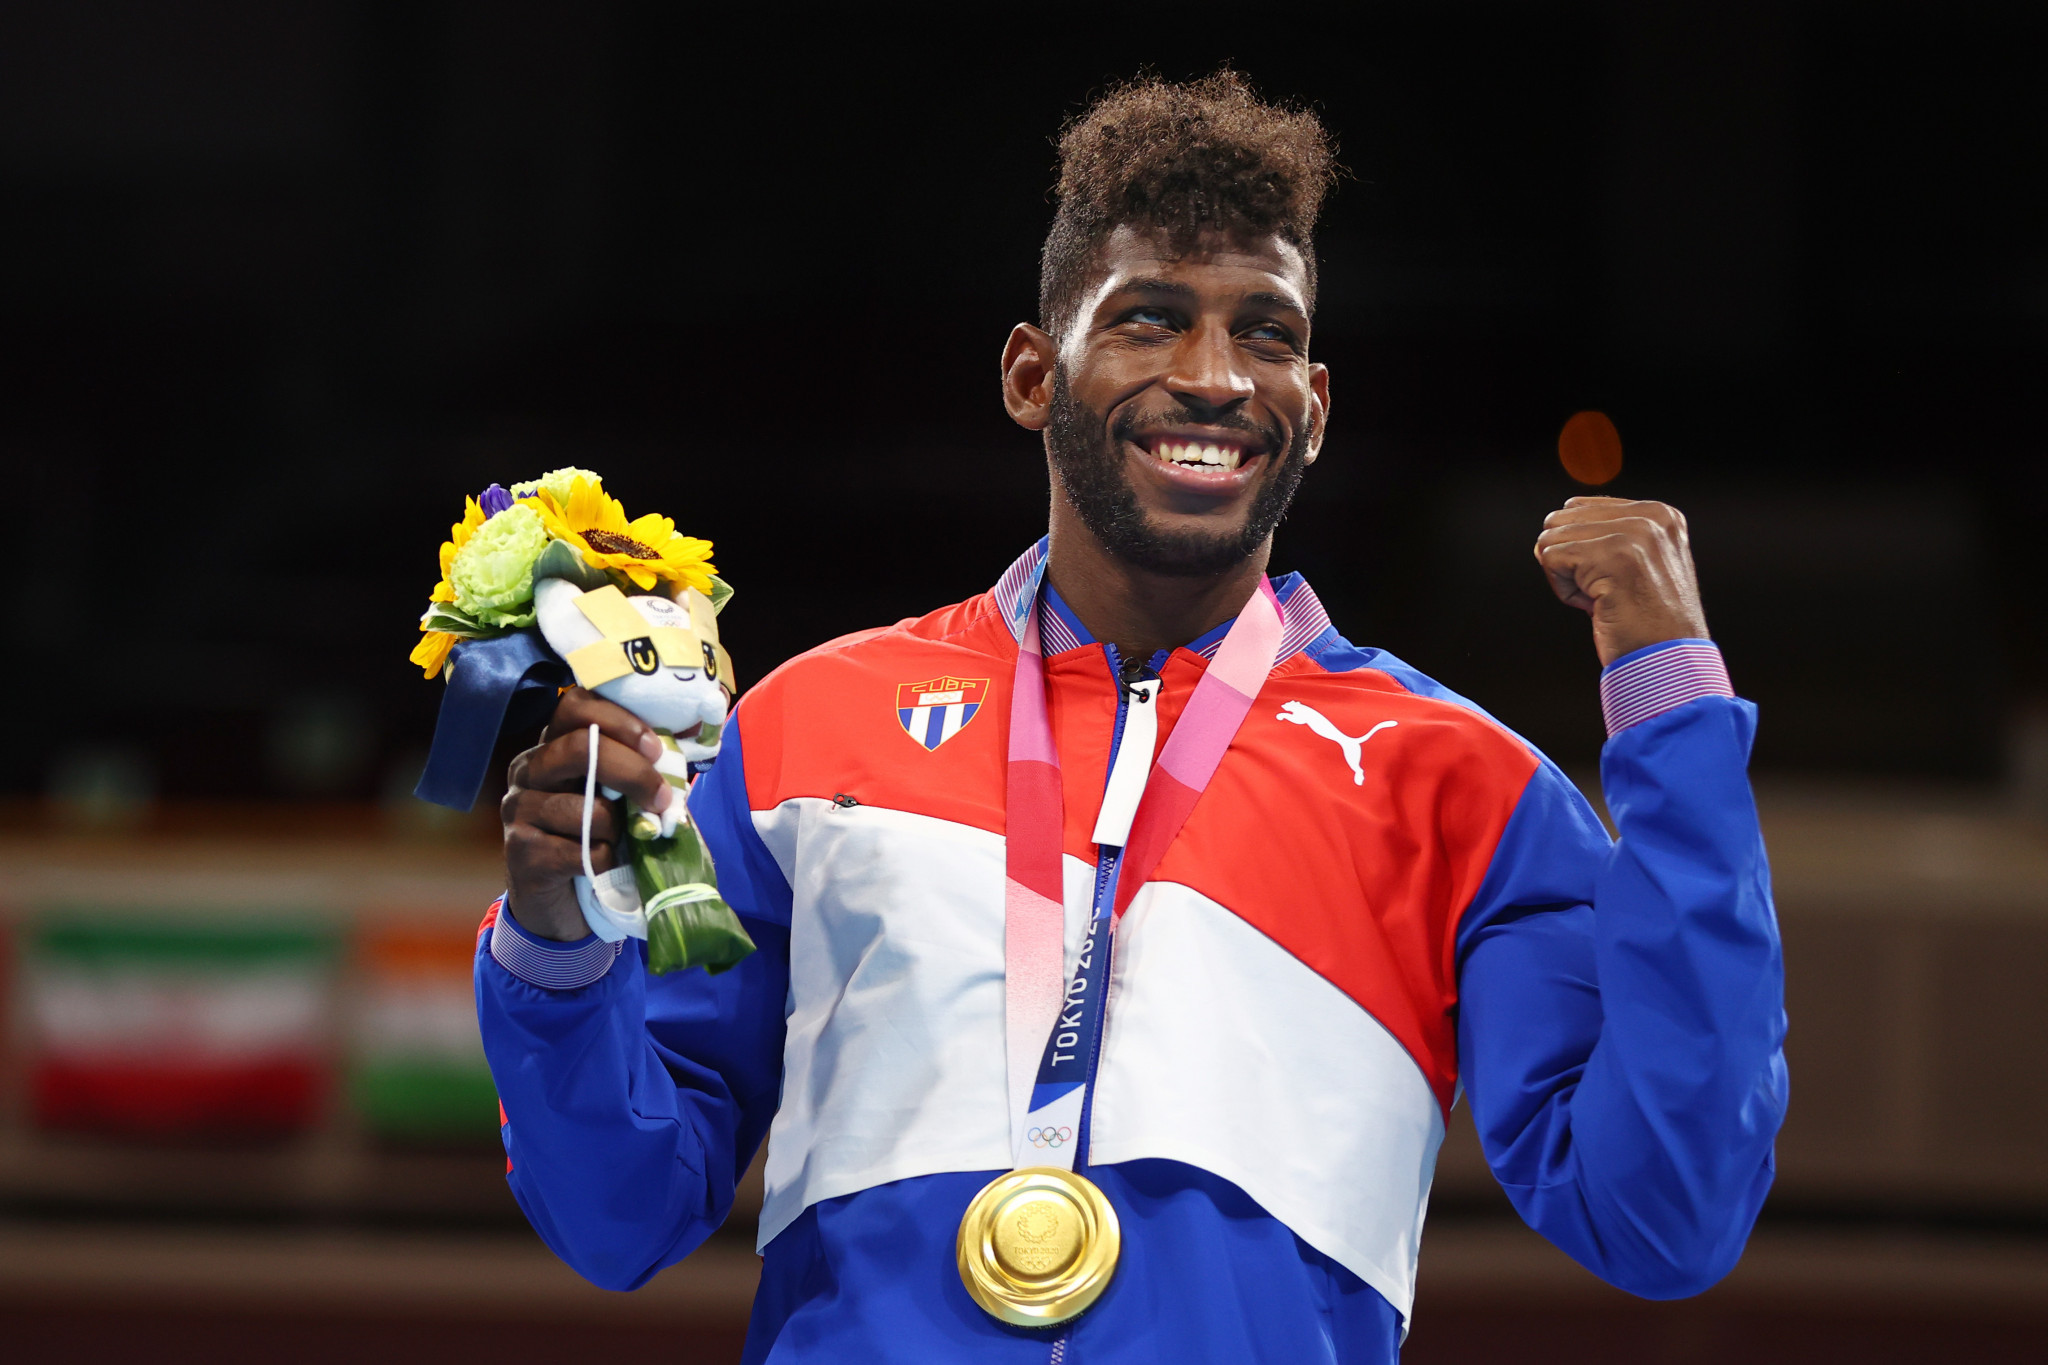 Olympic and world boxing champion Cruz claims he left Cuba legally after defection speculation